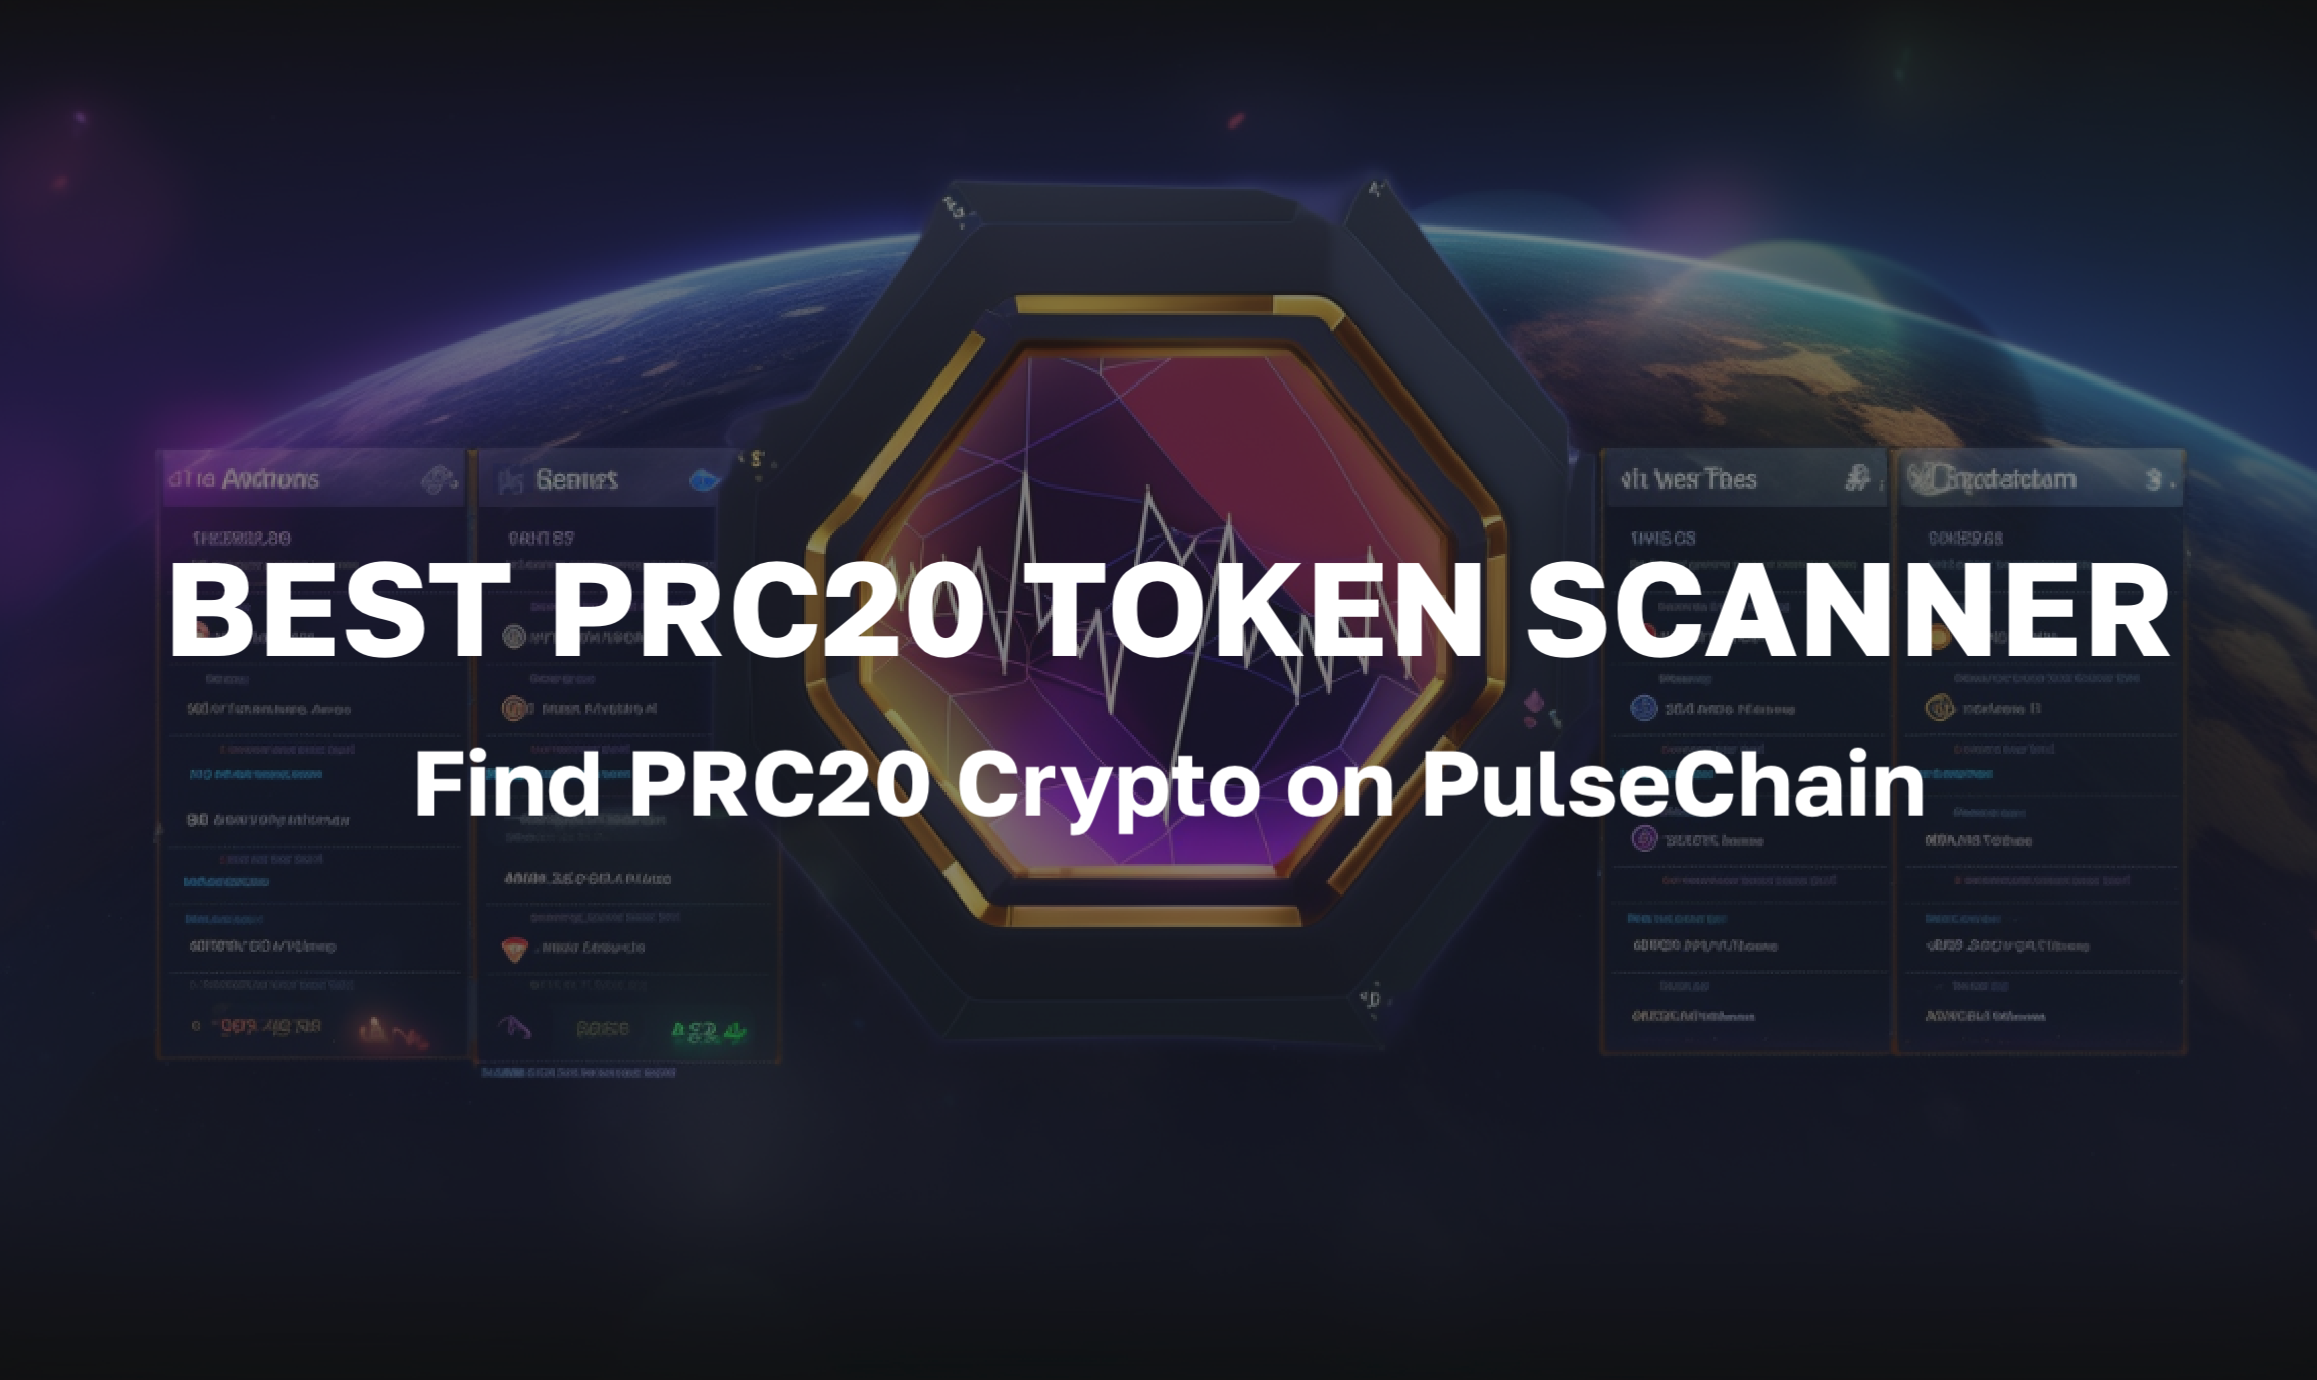 The Best PRC20 Token Scanner to Find PRC20 Crypto